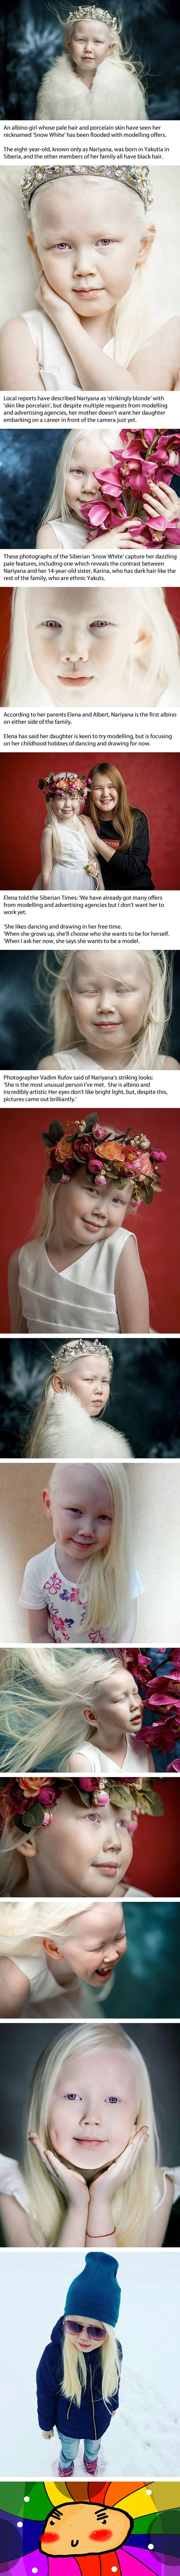 8-Year-Old Albino Snow White From Siberia Takes Fashion Industry